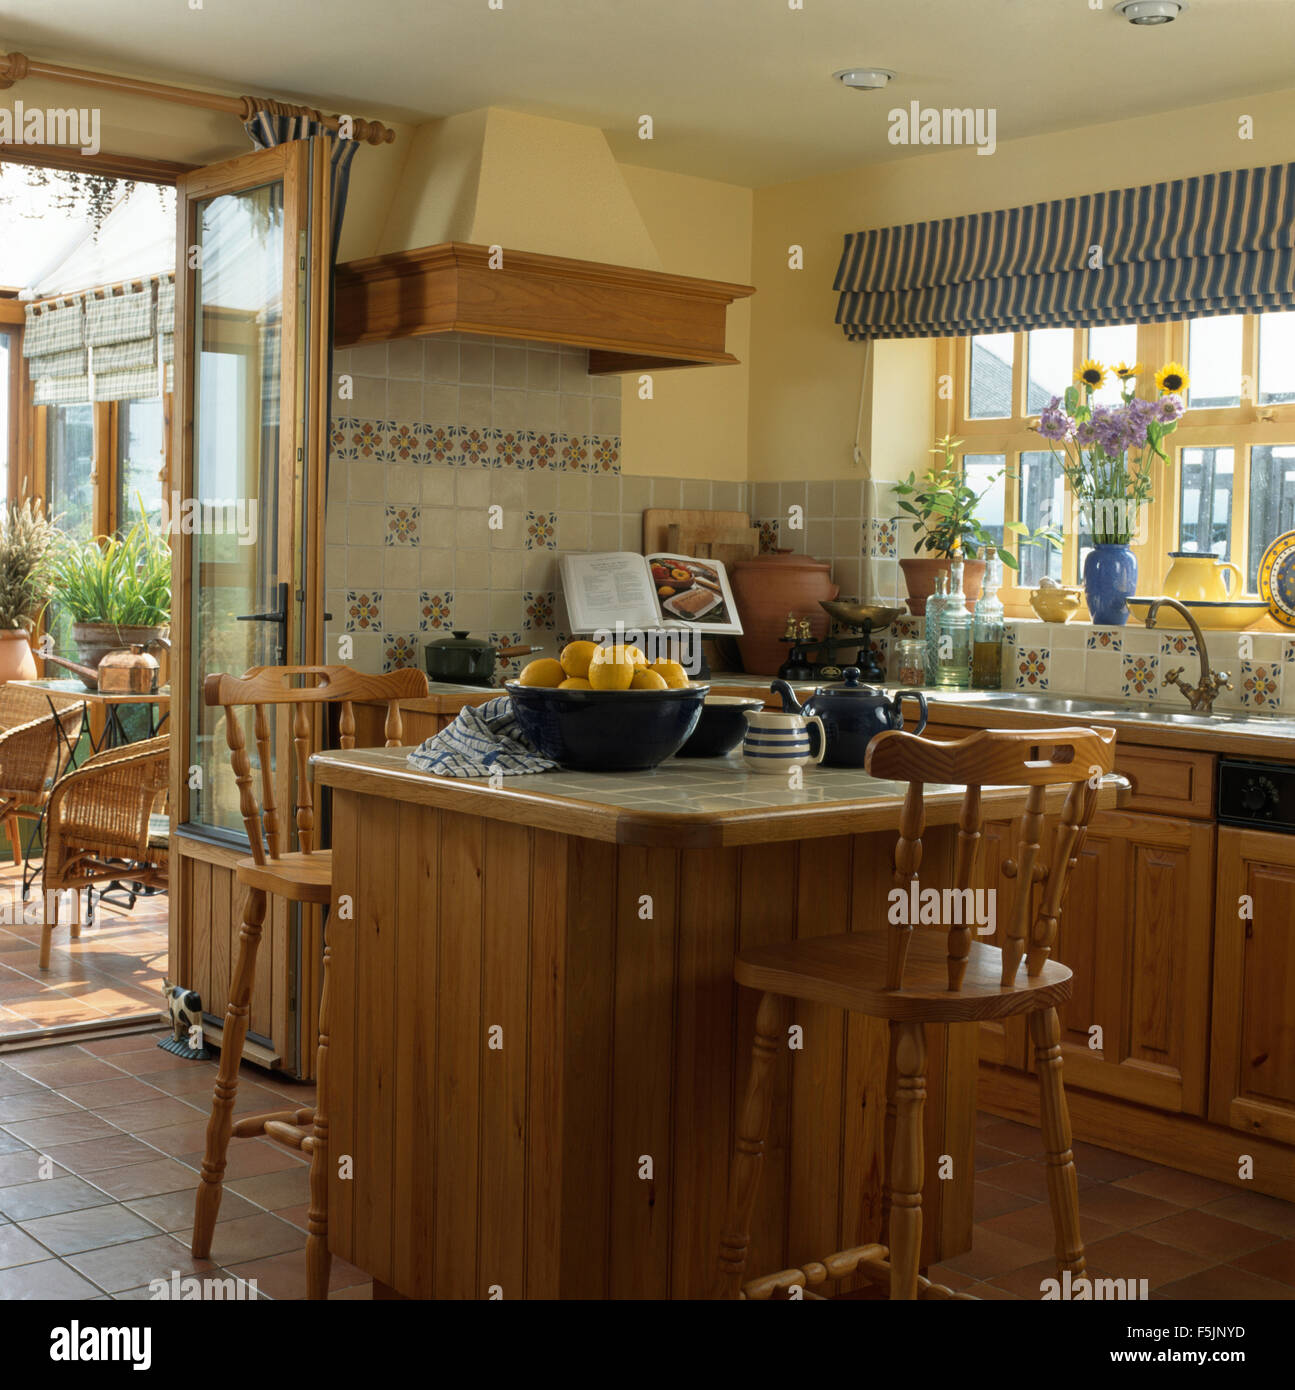 Pine stools at breakfast bar on island unit in a nineties kitchen with a striped blind on the window Stock Photo